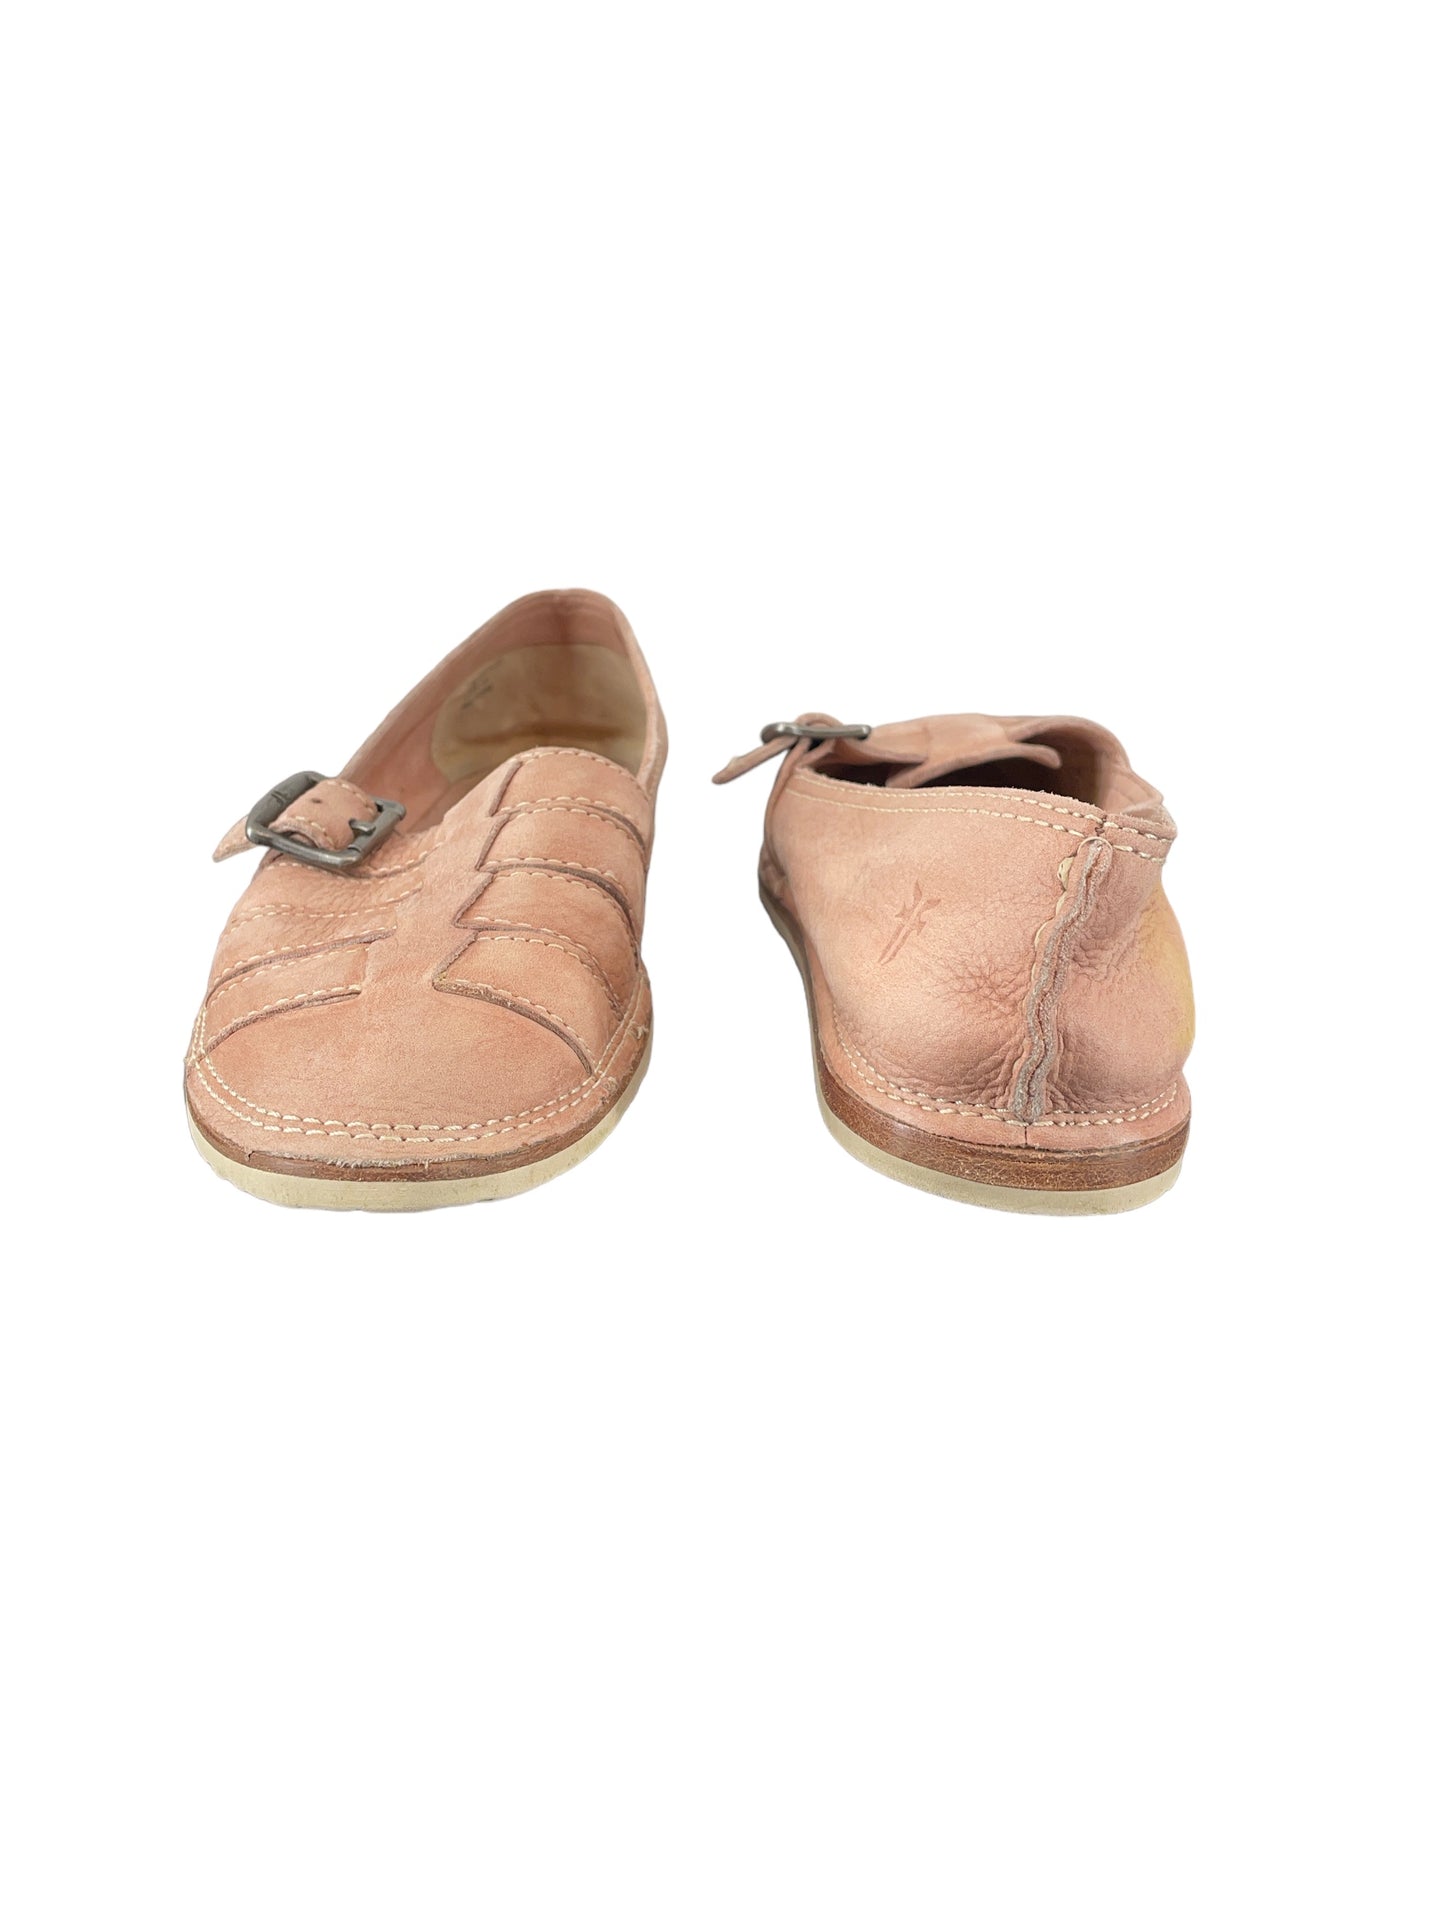 Shoes Flats Other By Frye  Size: 7.5